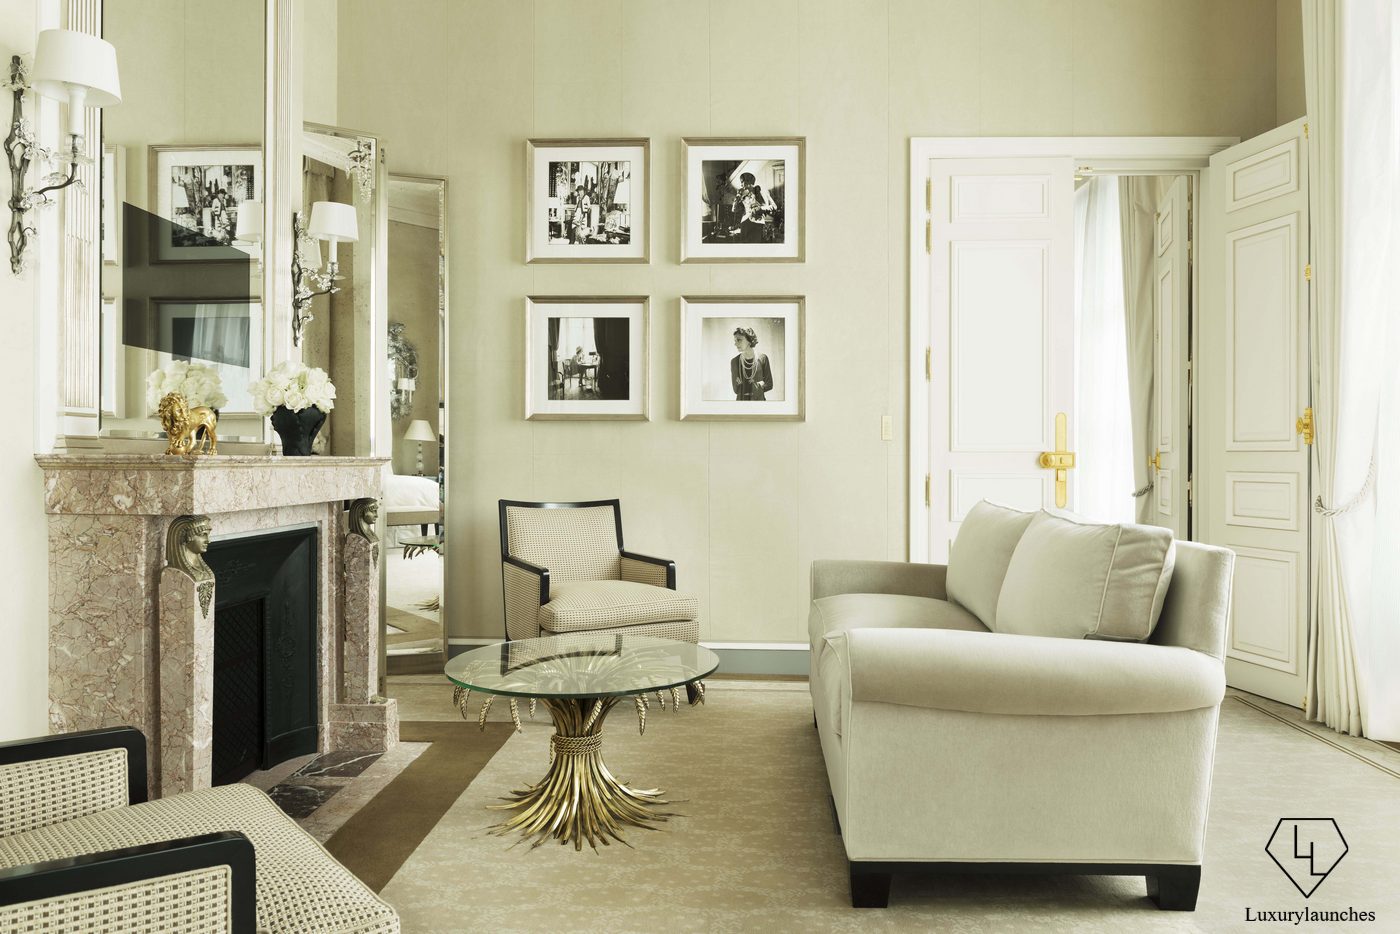 Suite of the Week - the Coco Chanel Suite at the Ritz Paris - Luxurylaunches